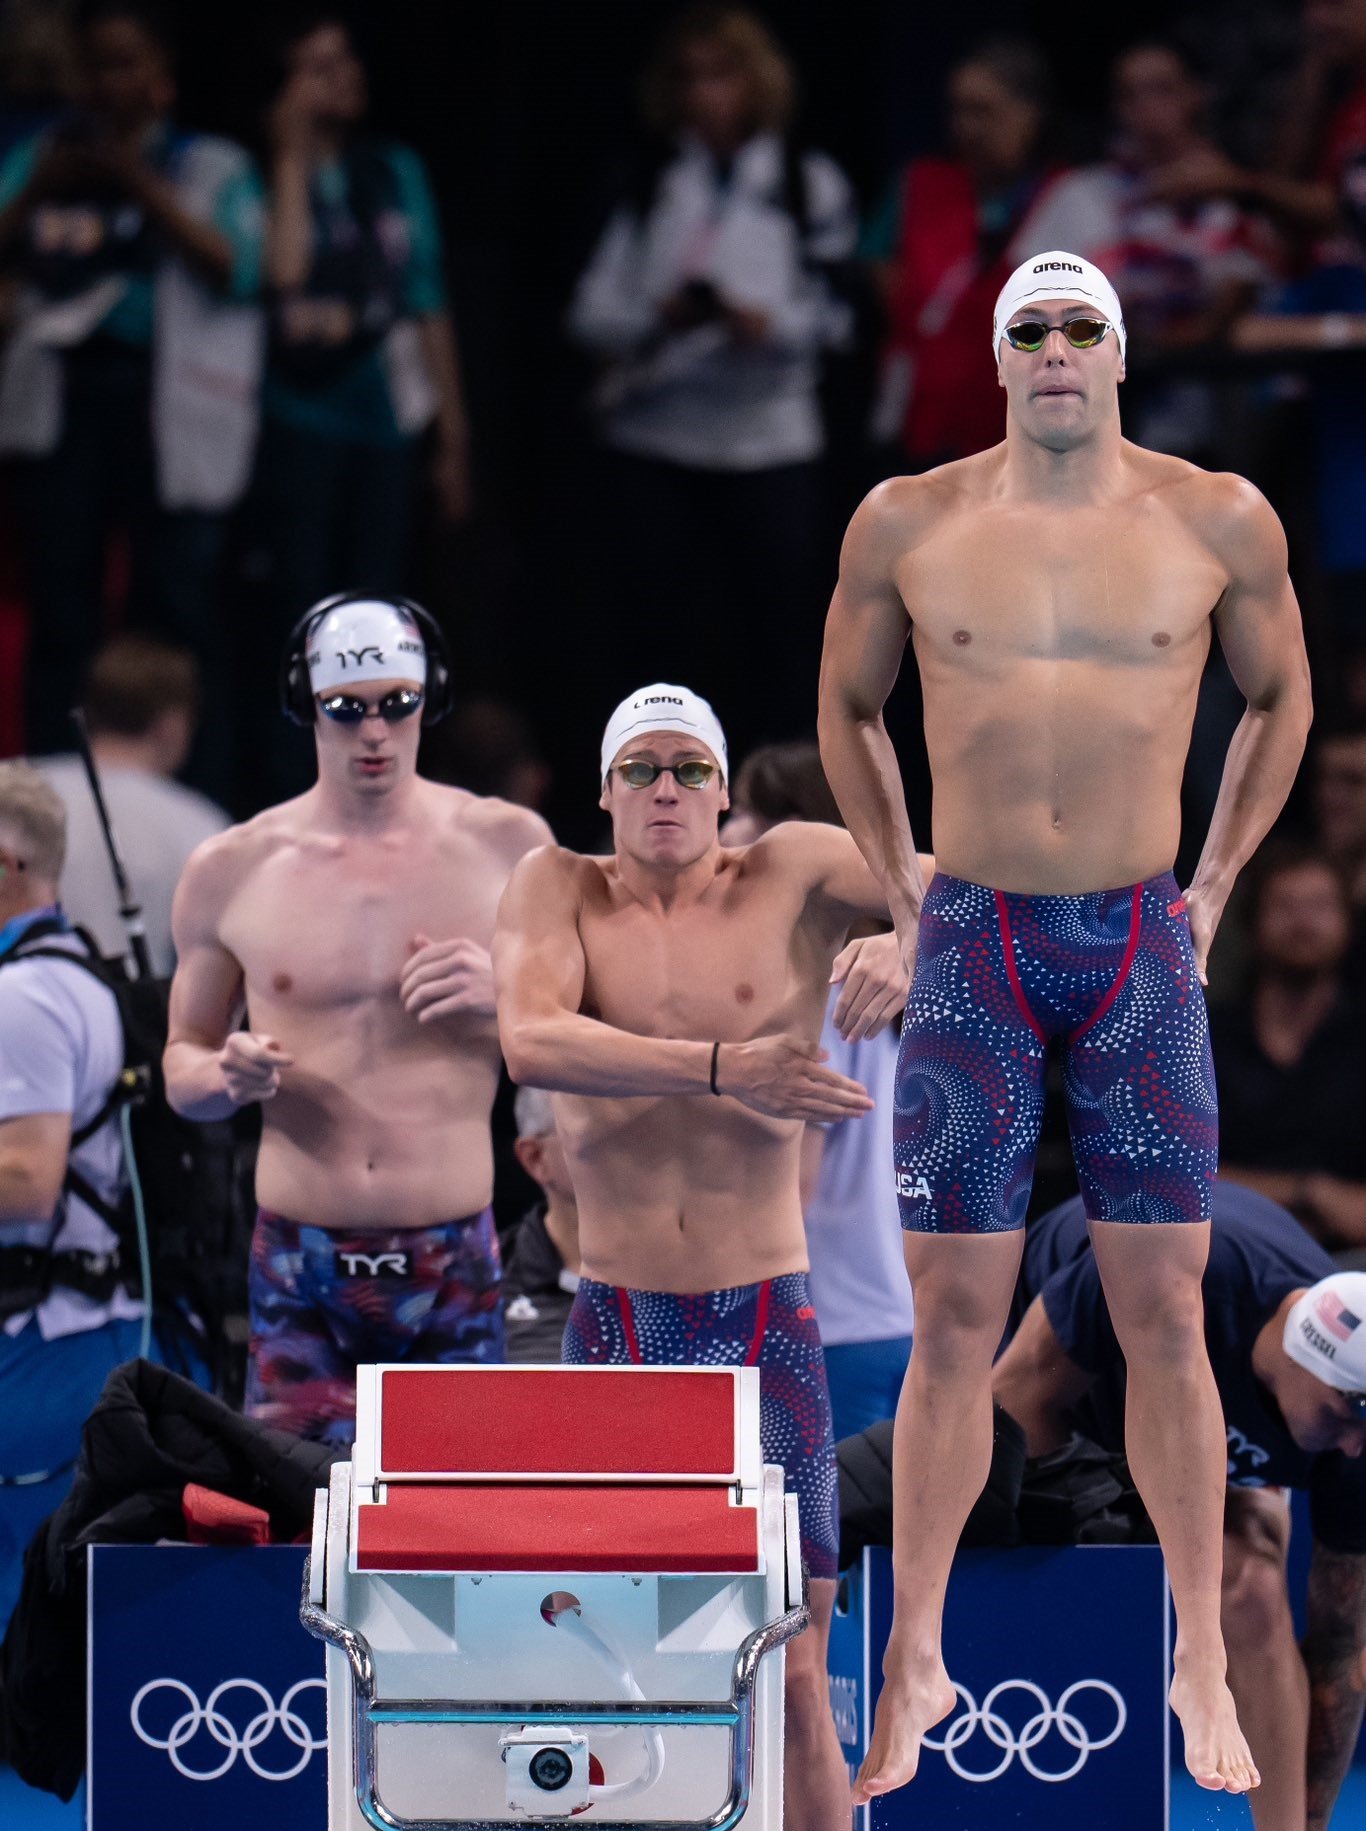 USA wins gold in men’s 4x100M freestyle relay final 5